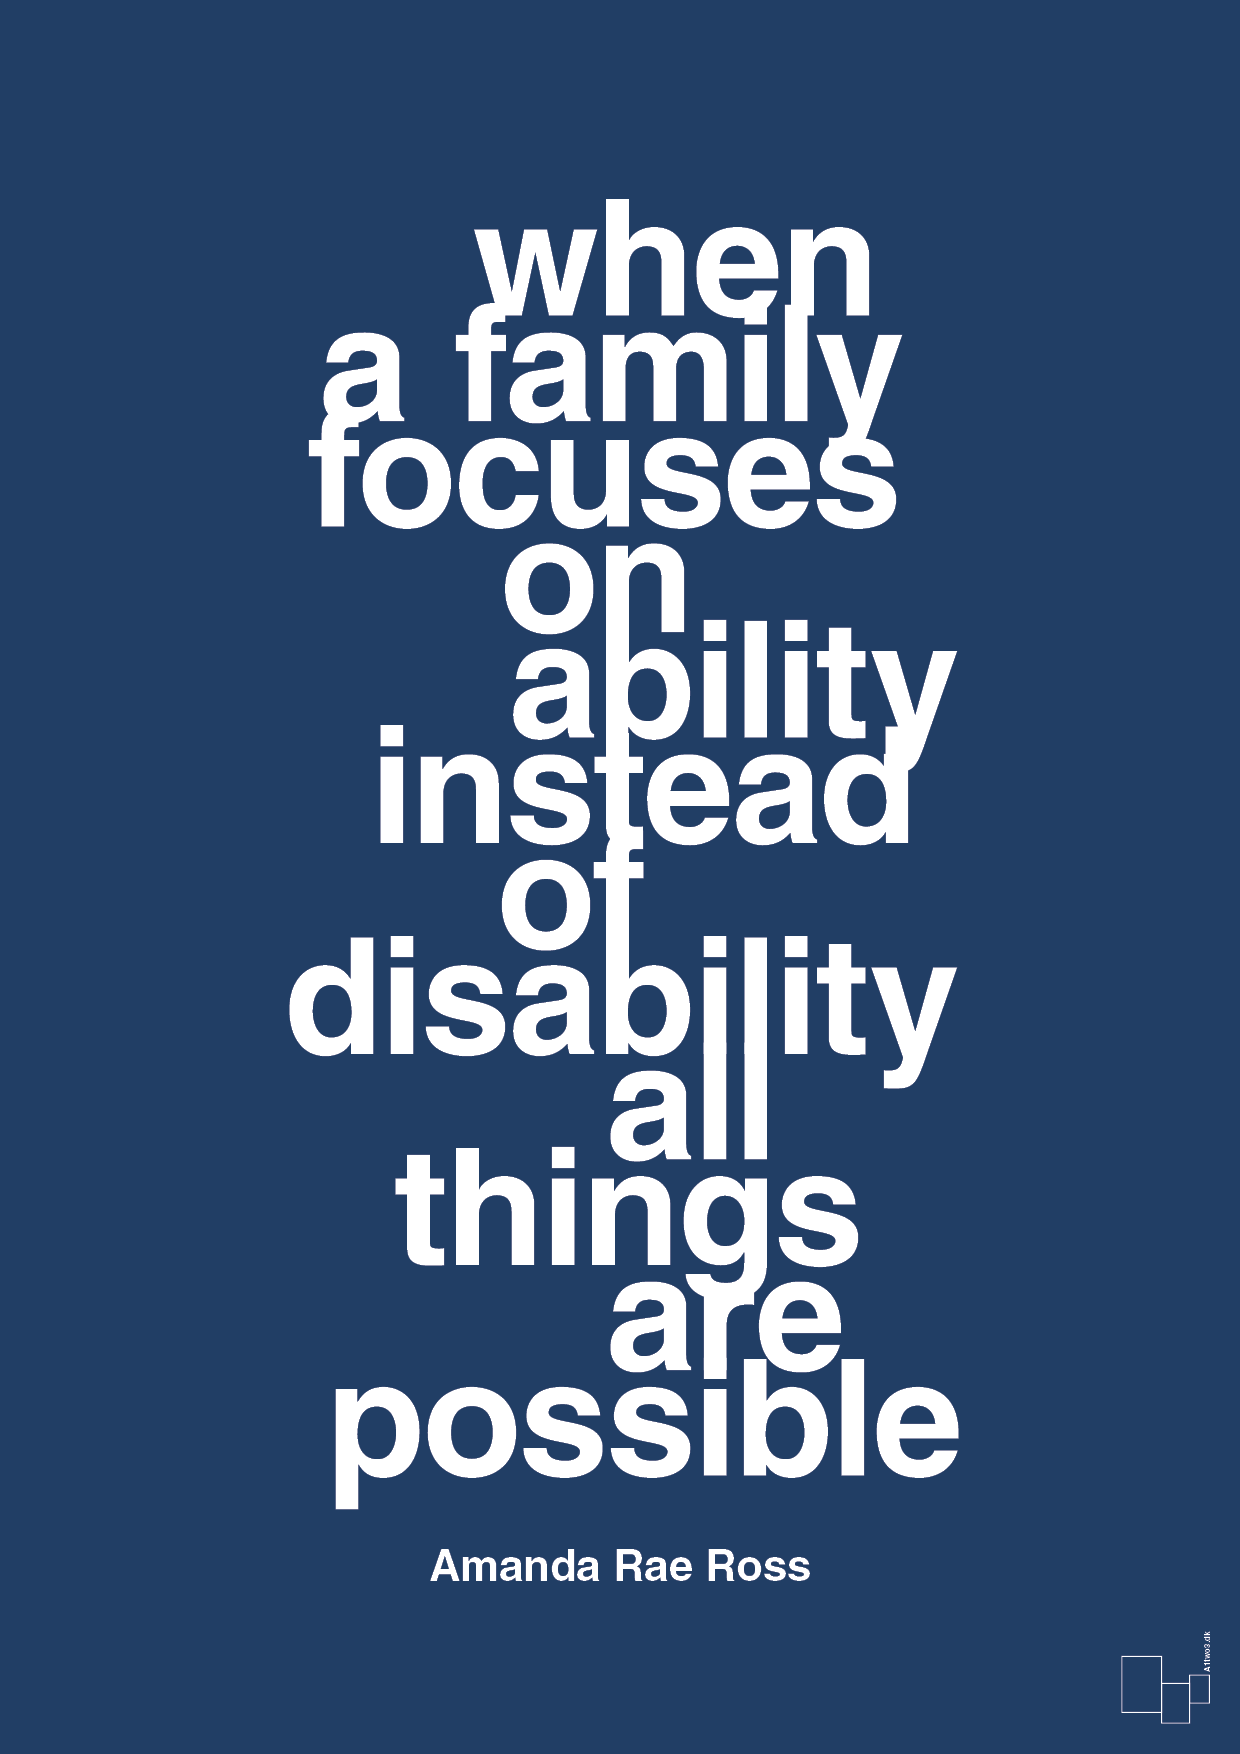 when a family focuses on ability instead of disability all things are possible - Plakat med Samfund i Lapis Blue